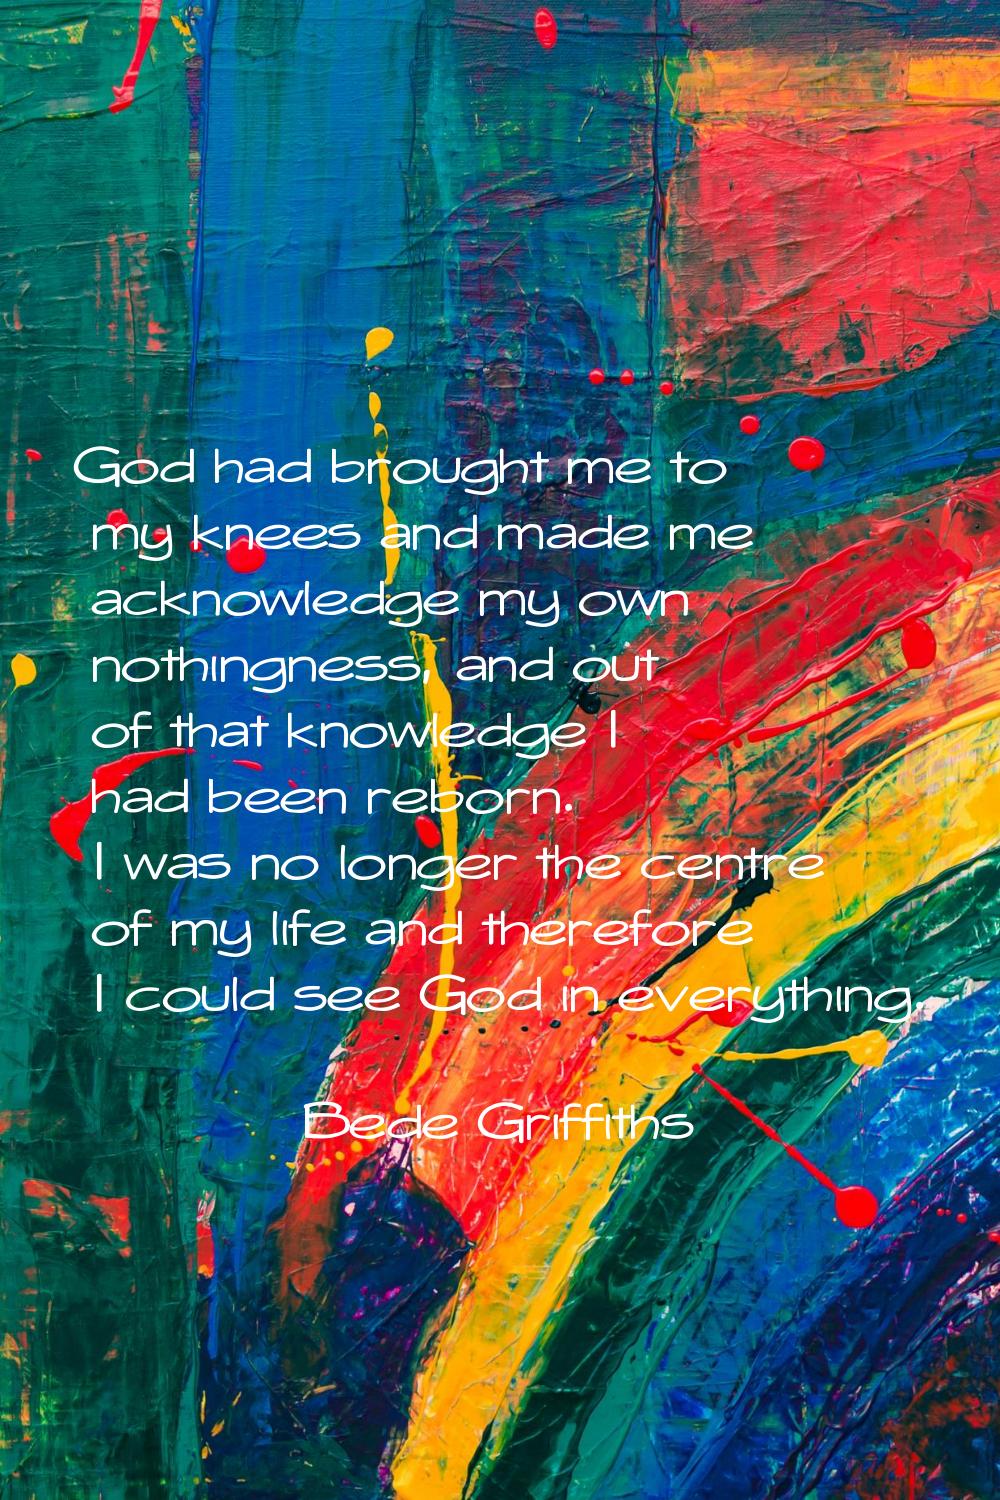 God had brought me to my knees and made me acknowledge my own nothingness, and out of that knowledg